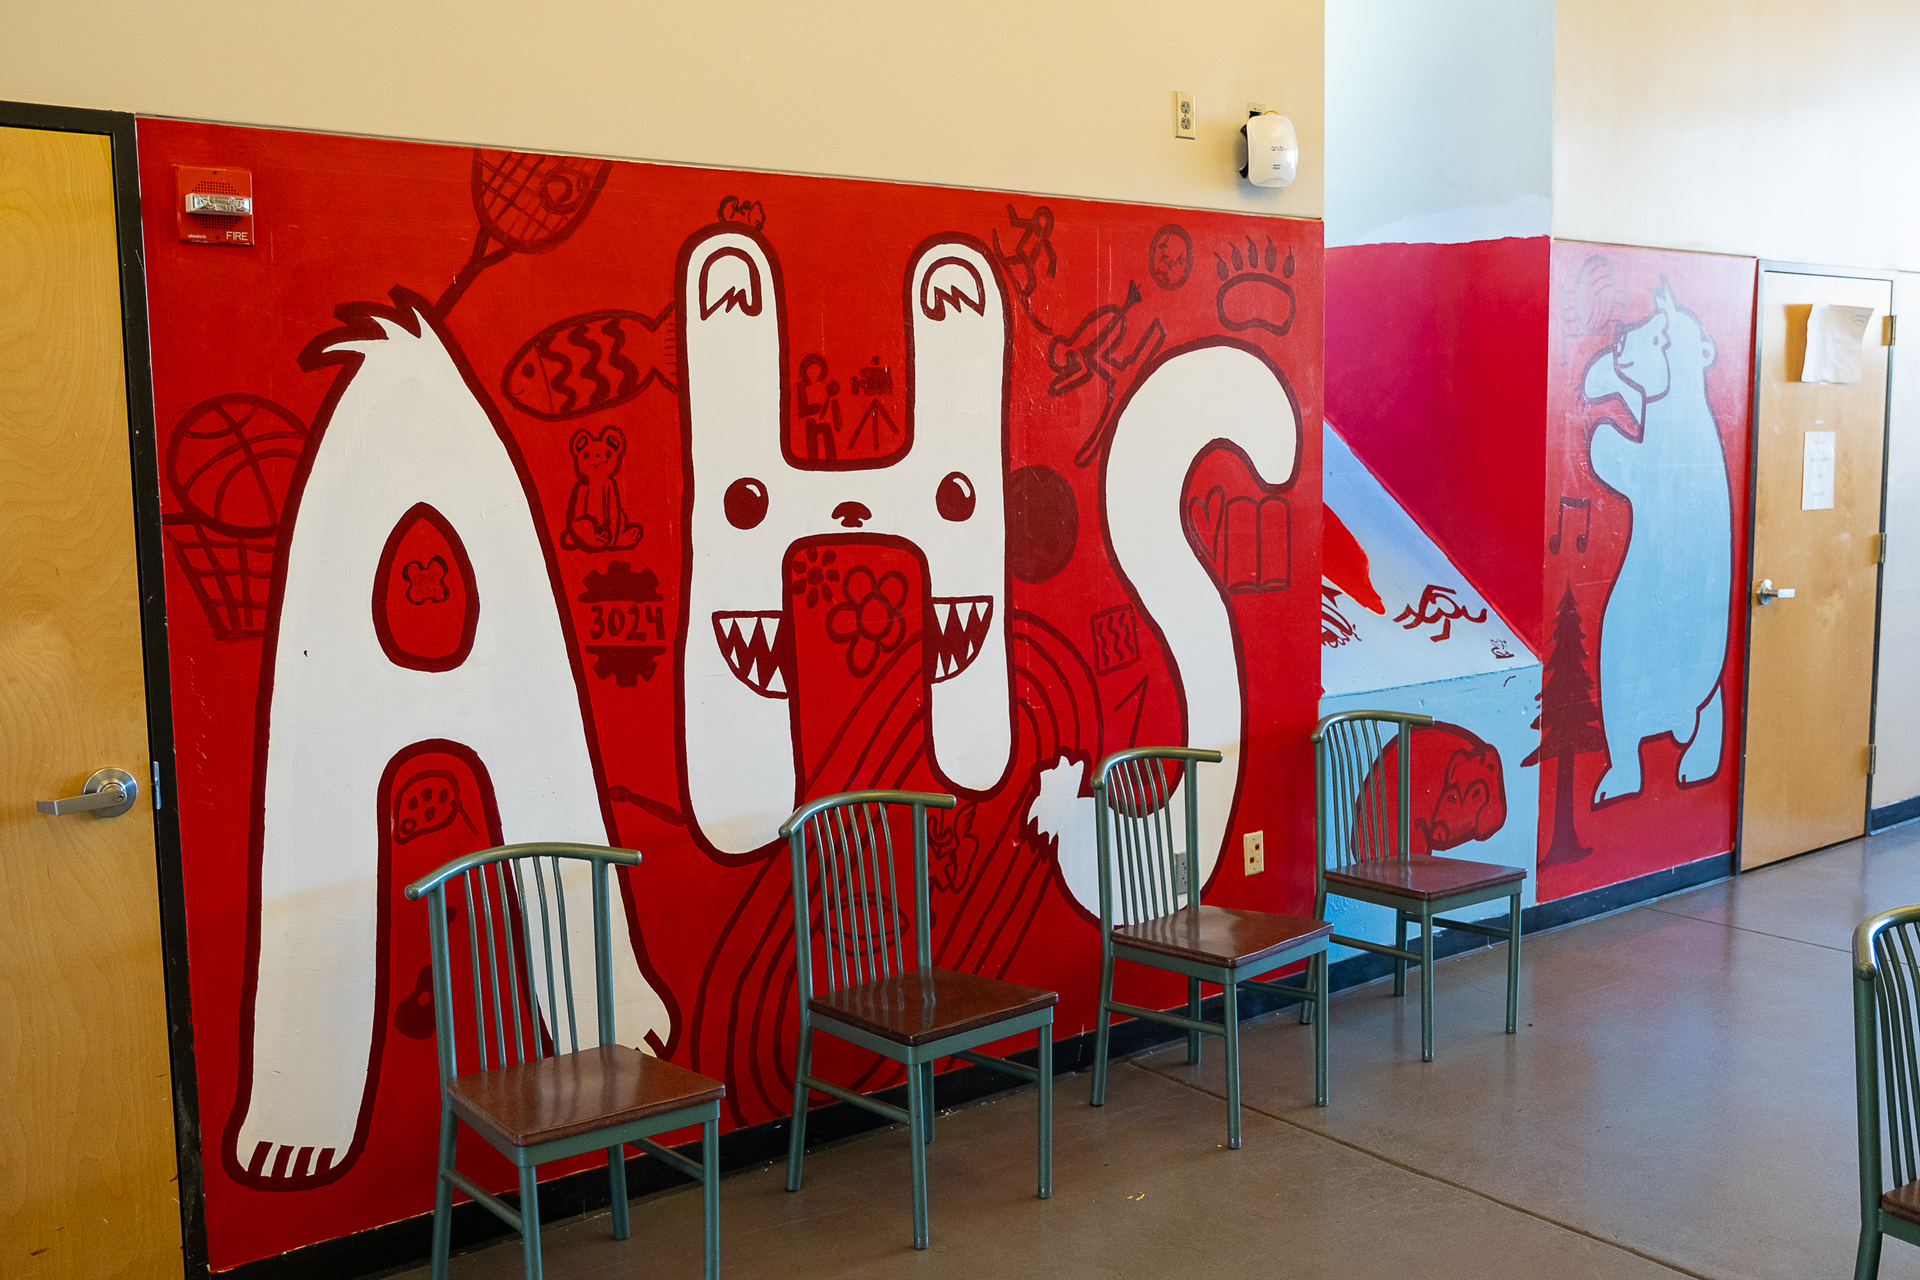 School Mascot Art: A large, bold mural of a school mascot in vivid red tones, providing a dynamic backdrop to a cafeteria setting.